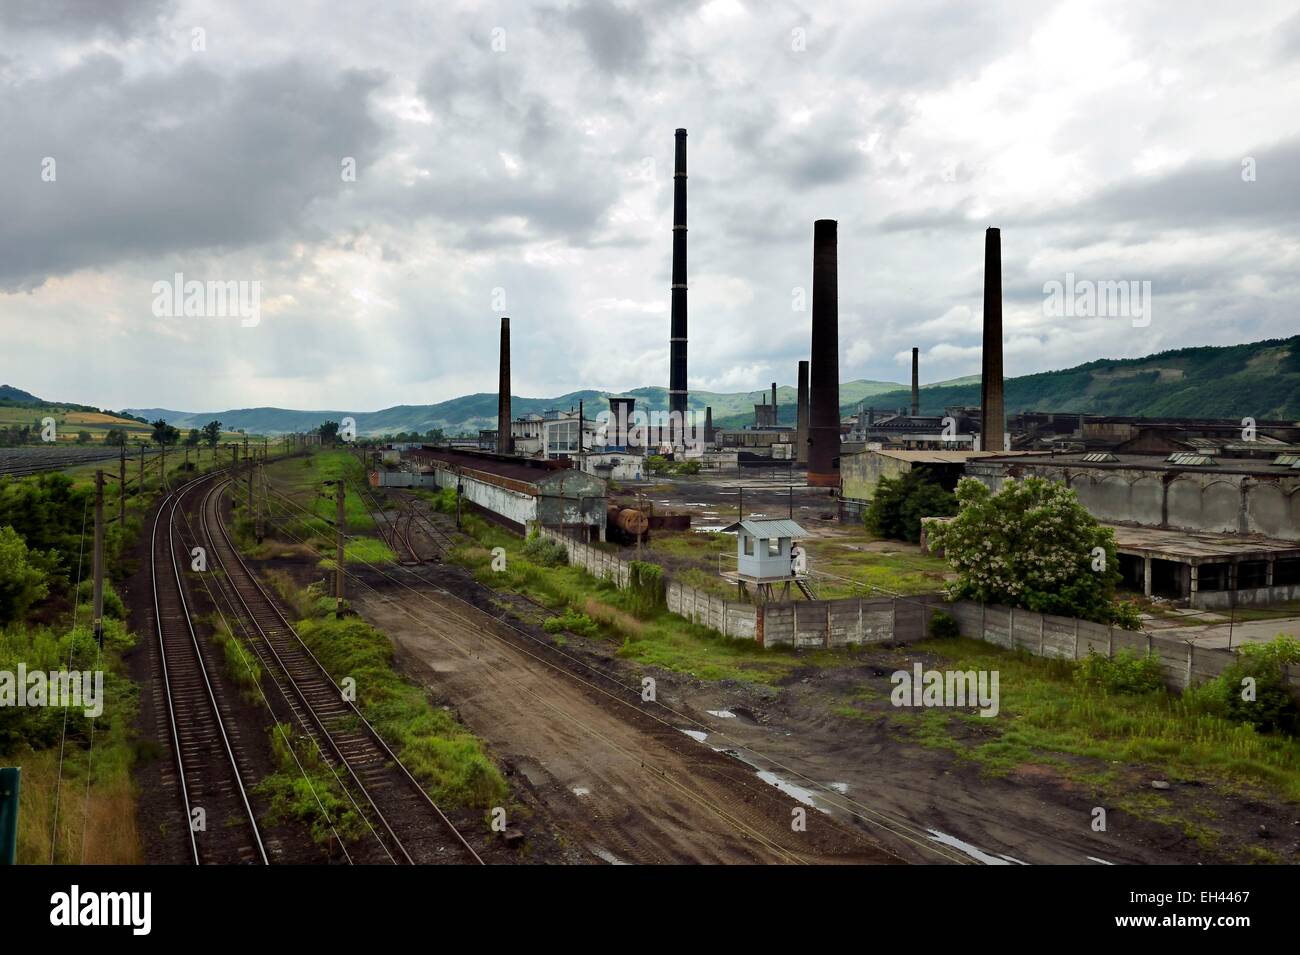 Romania, Transylvania, Copsa Mica, the city is known as one of the most polluted cities in Europe until the 1990s due to emissions of two factories closed today Stock Photo